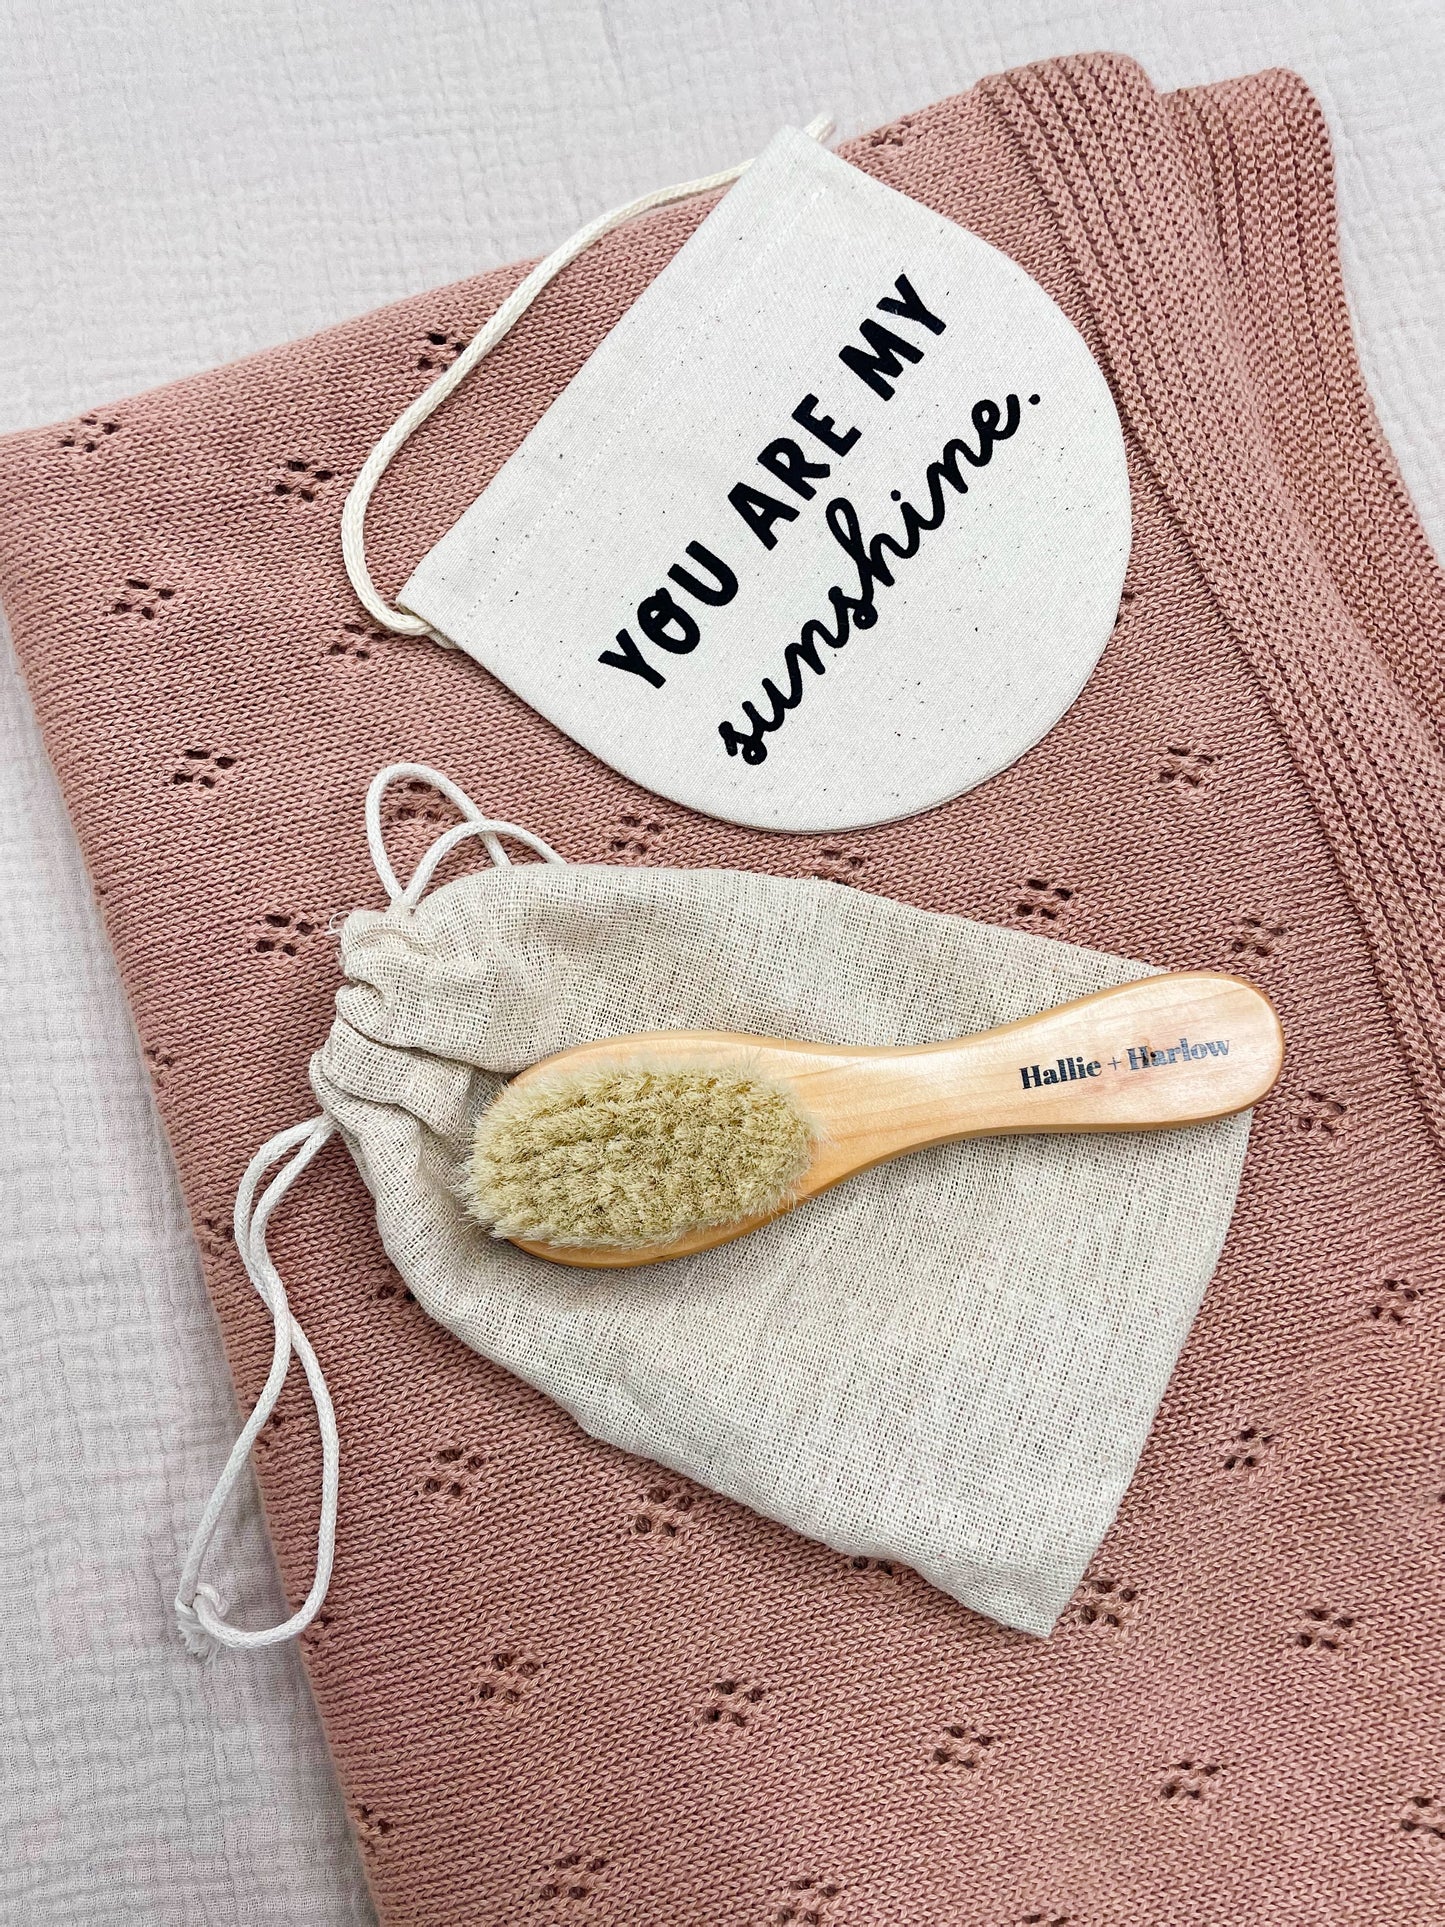 knitted cotton blanket in almond, with a baby hairbrush and a 'you are my sunshine' sign on top